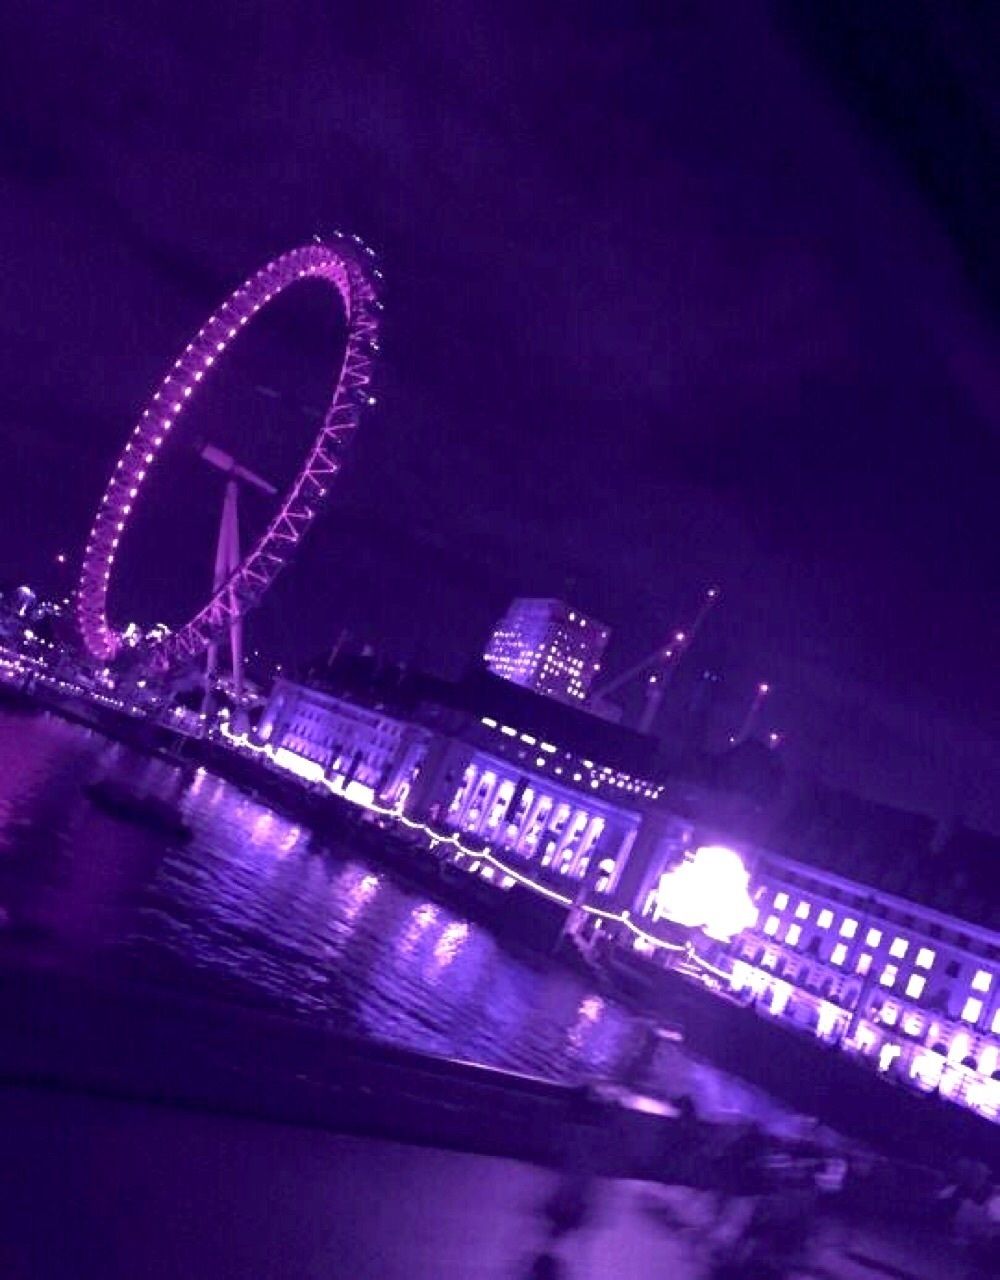 A purple lighted ferris wheel in the city - City